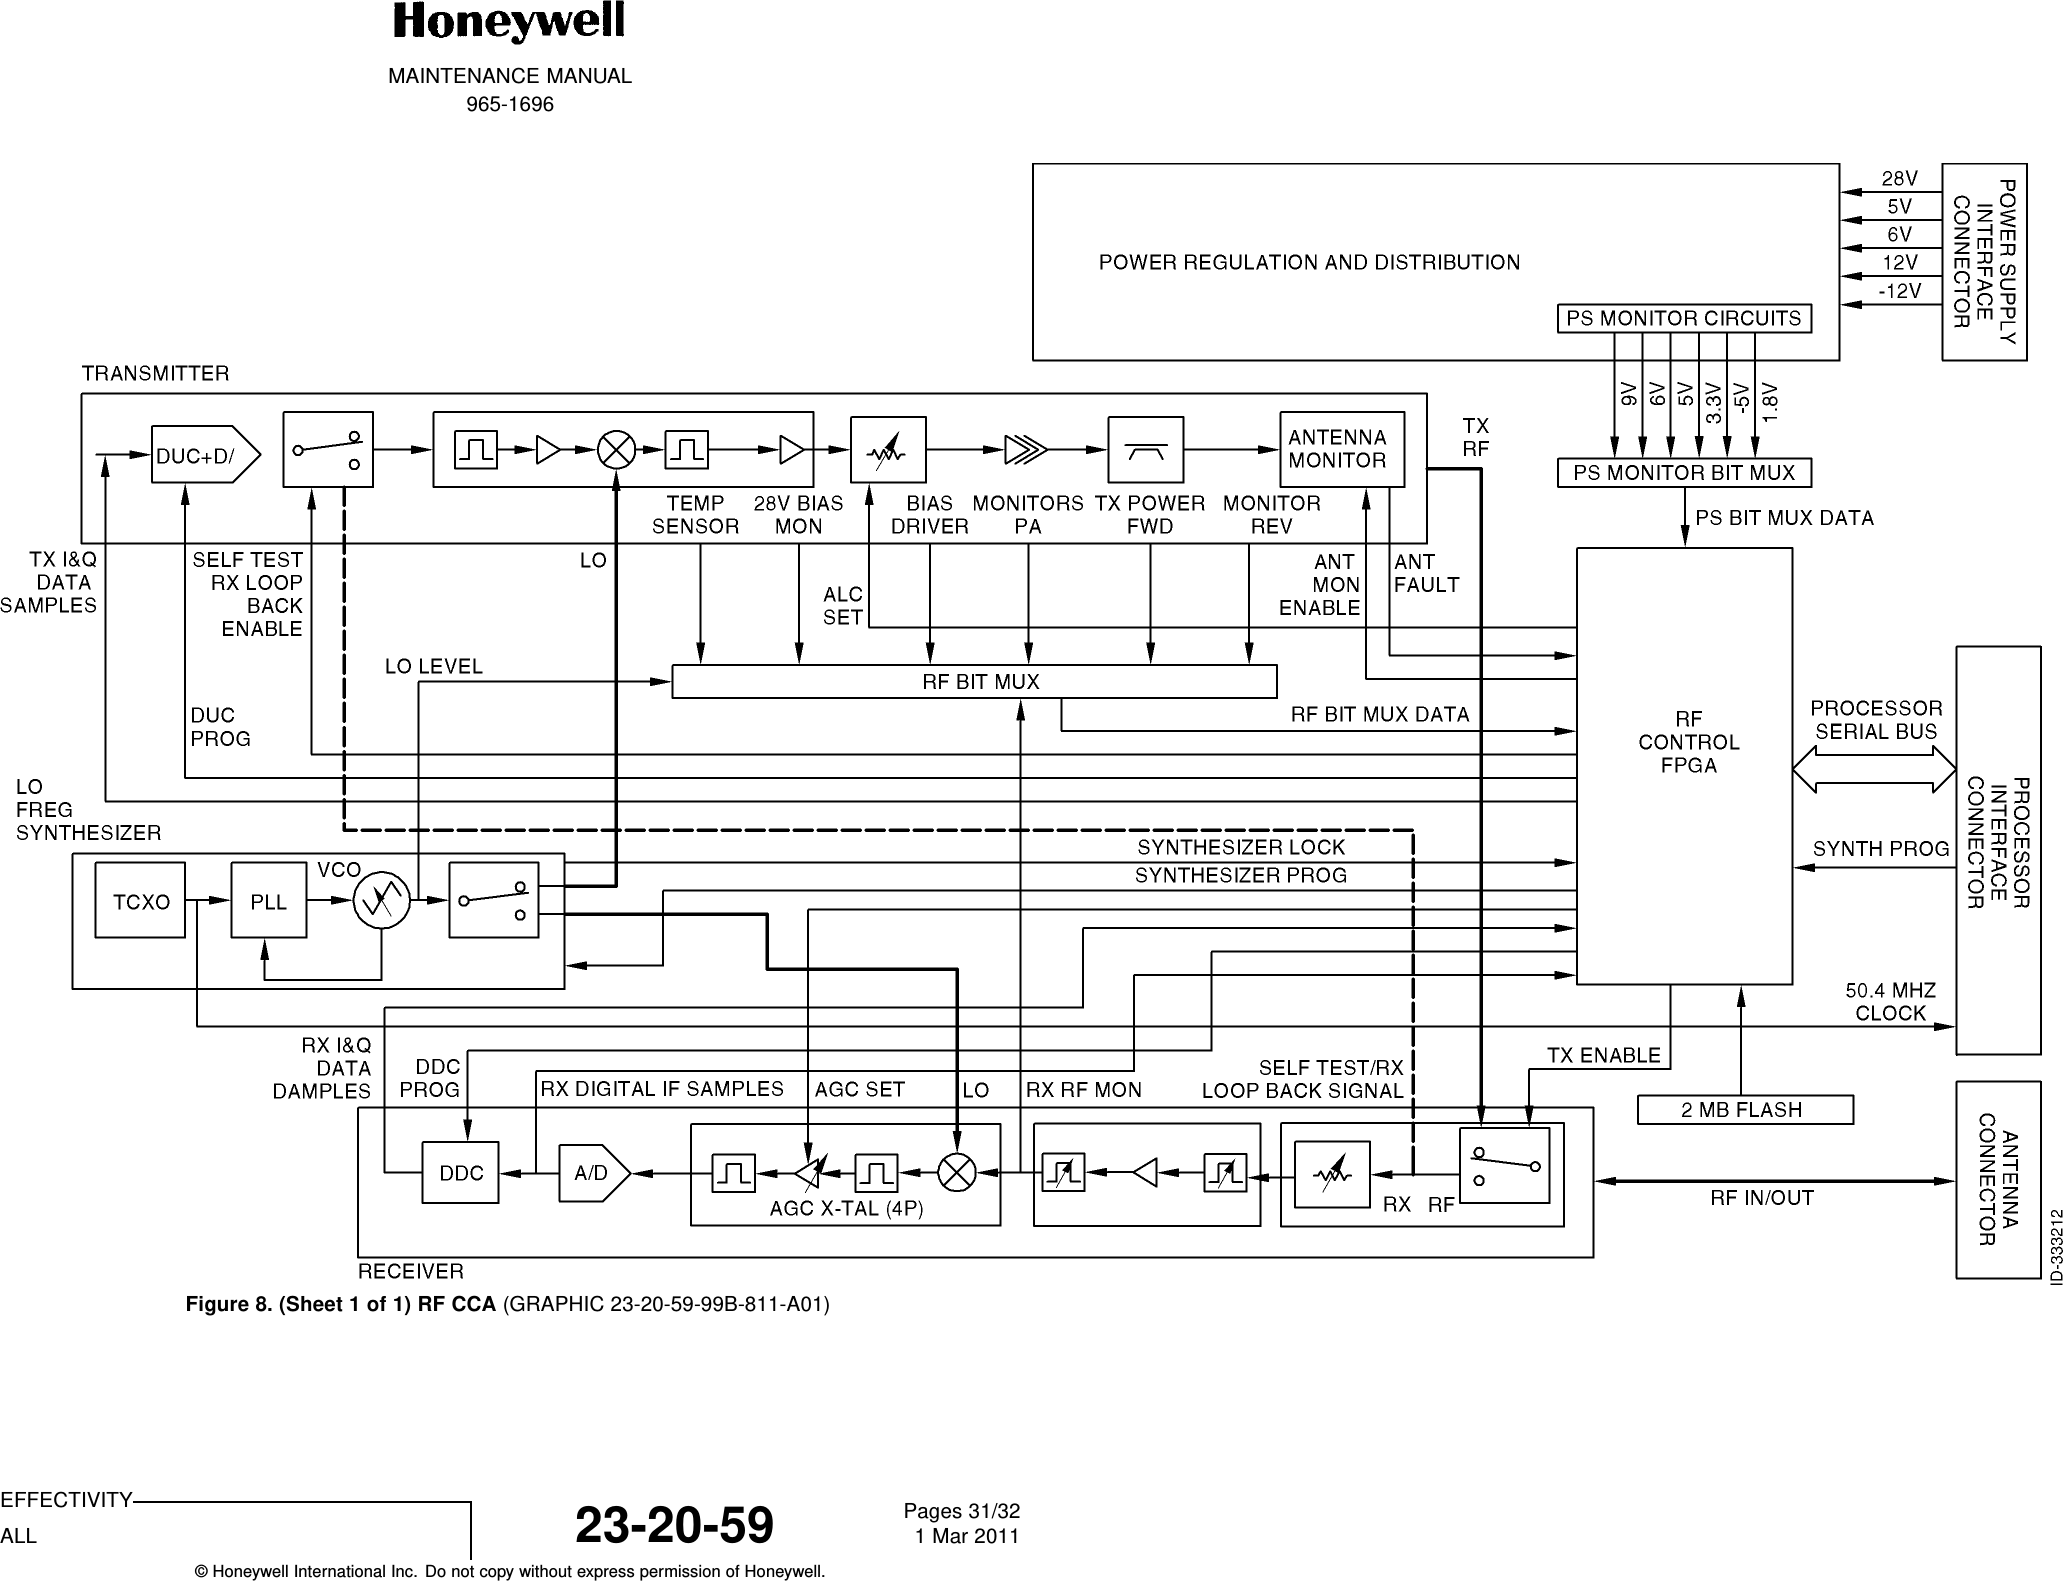 MAINTENANCE MANUAL965-1696Figure 8. (Sheet 1 of 1) RF CCA (GRAPHIC 23-20-59-99B-811-A01)EFFECTIVITYALL 23-20-59 Pages 31/321 Mar 2011© Honeywell International Inc. Do not copy without express permission of Honeywell.